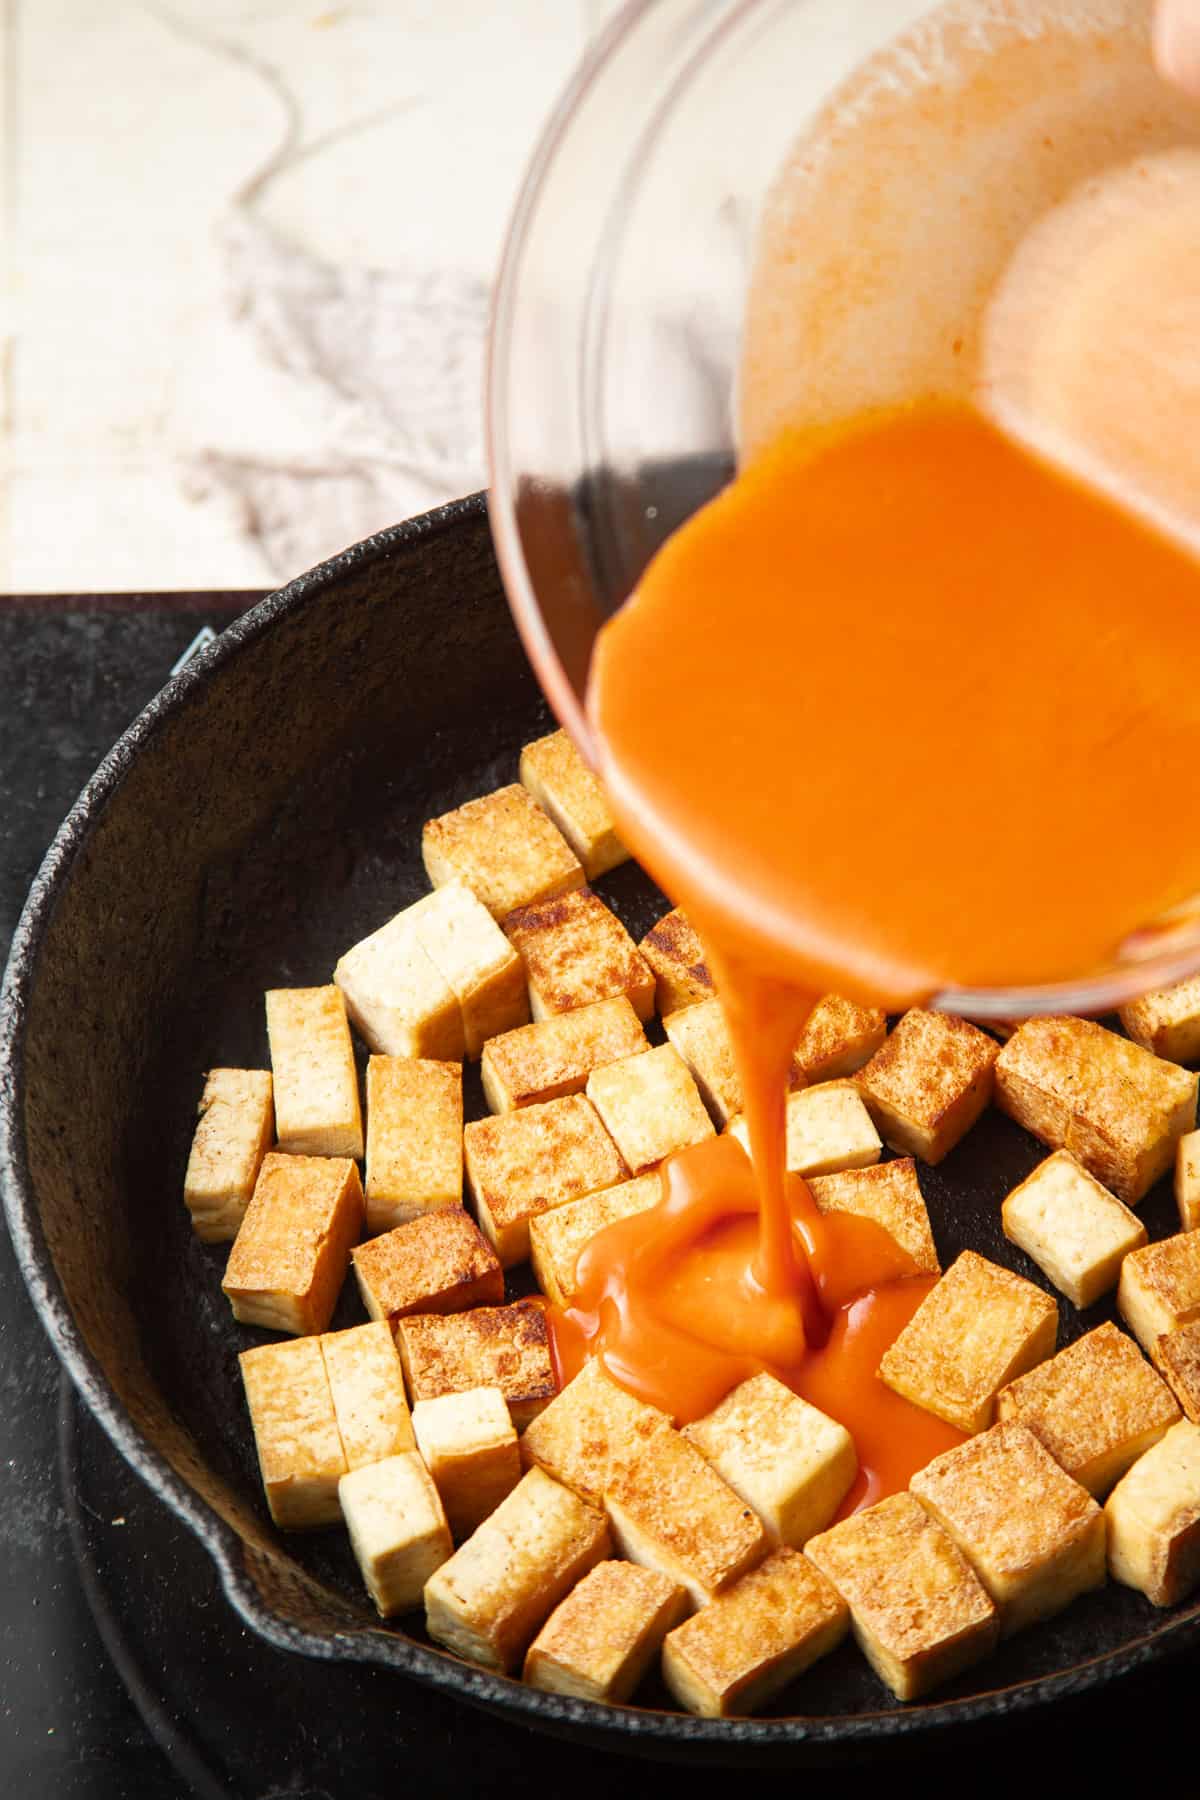 Buffalo sauce being poured over tofu cooking in a skillet.